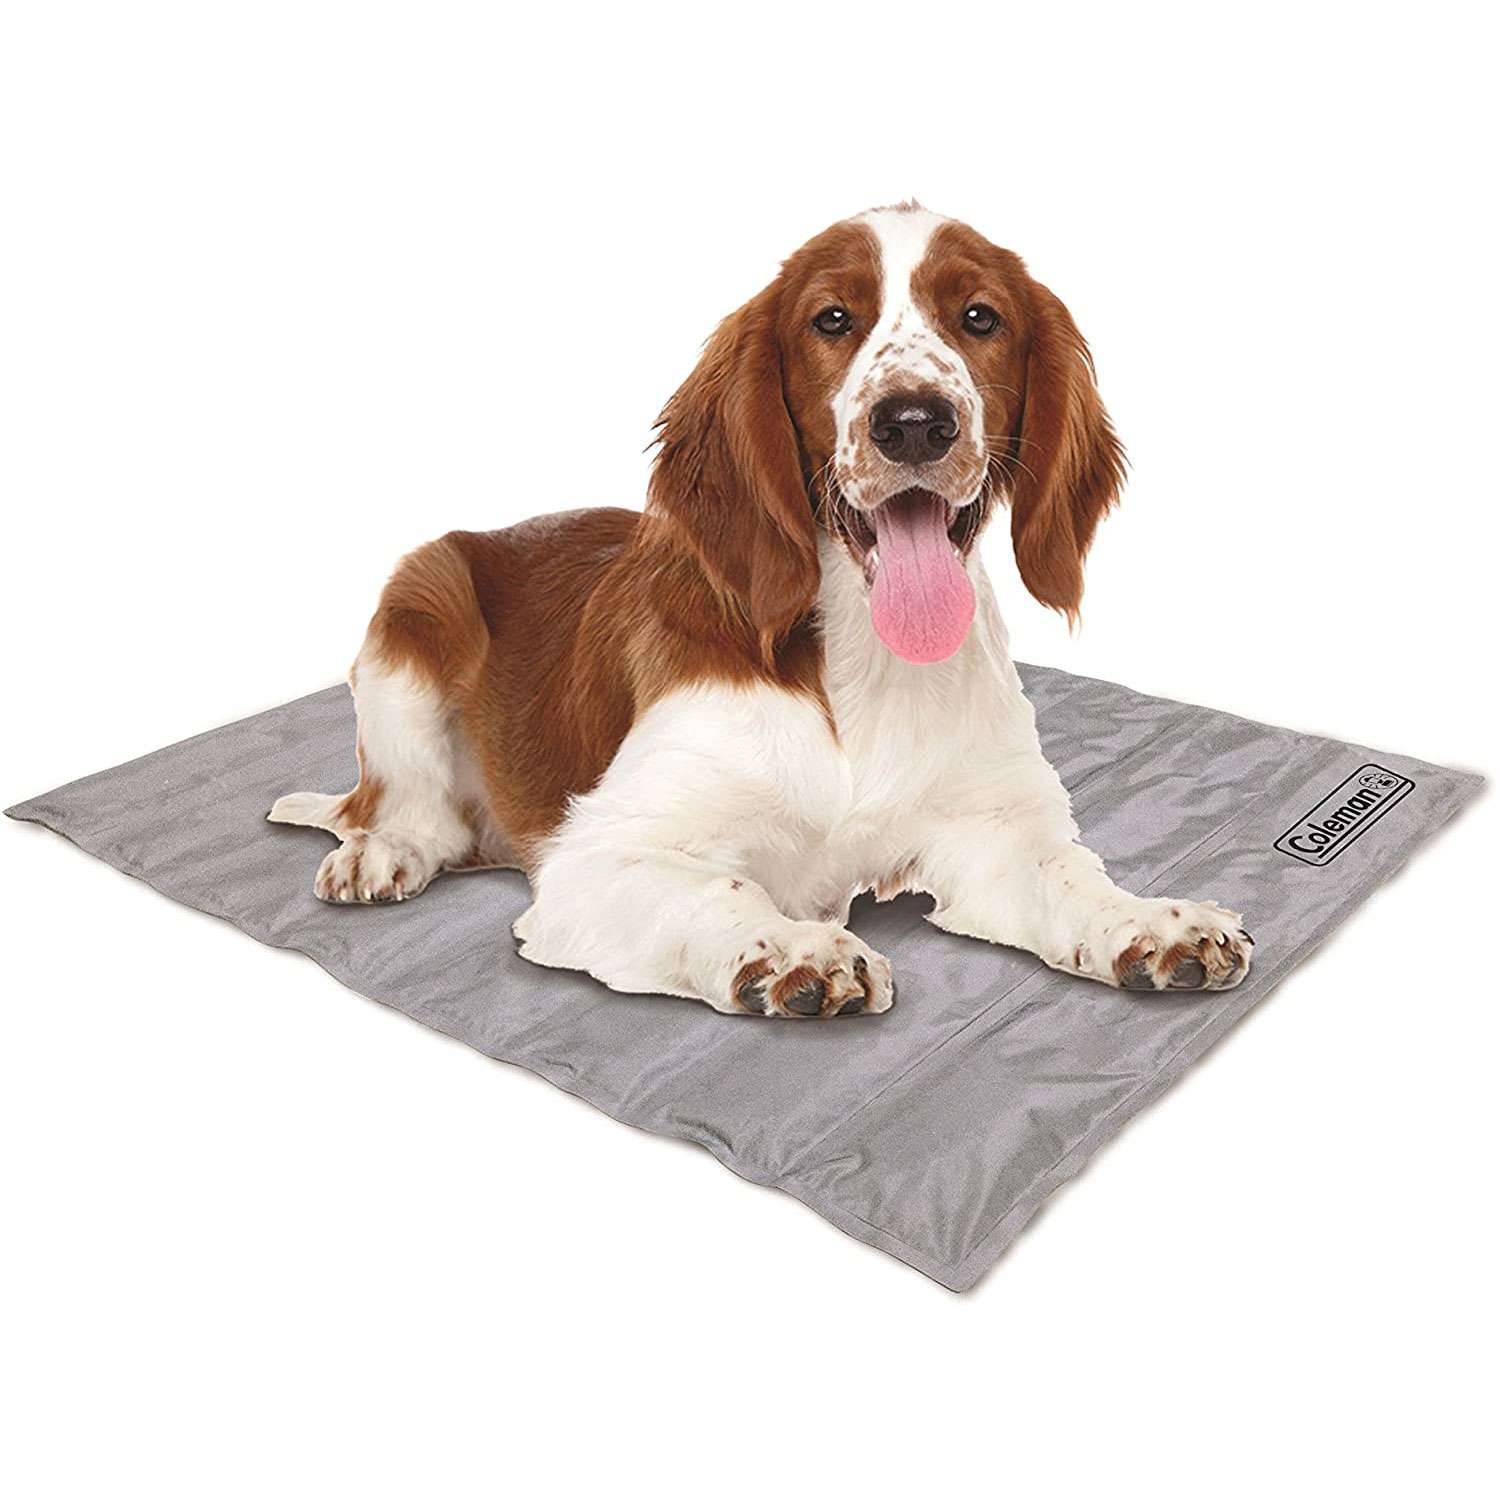 Size M 36”x20” Anti-Inflammatory with Grooming Comb Pressure Activated Crates Cats 15~50lbs Self Cooling Gel Pad for Kennels Beds Dog Cooling Mat for Pets